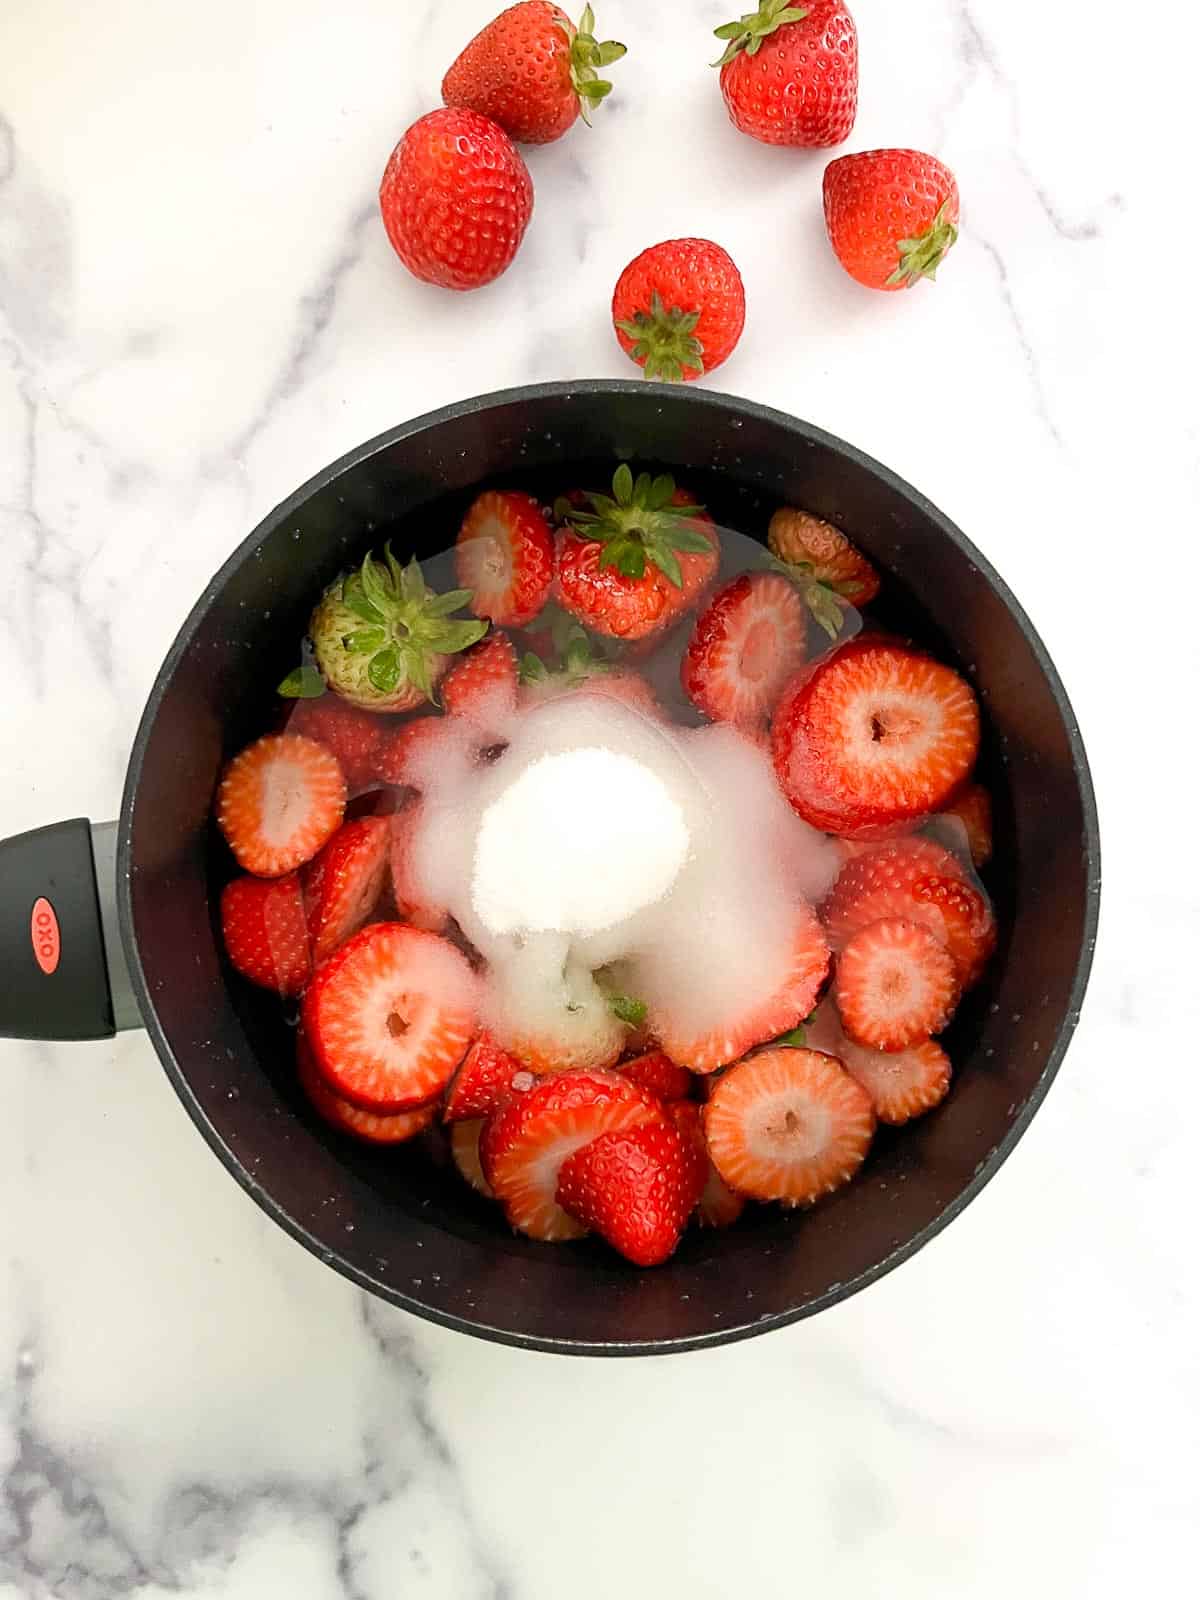 Strawberries and sugar in a saucepan with water.